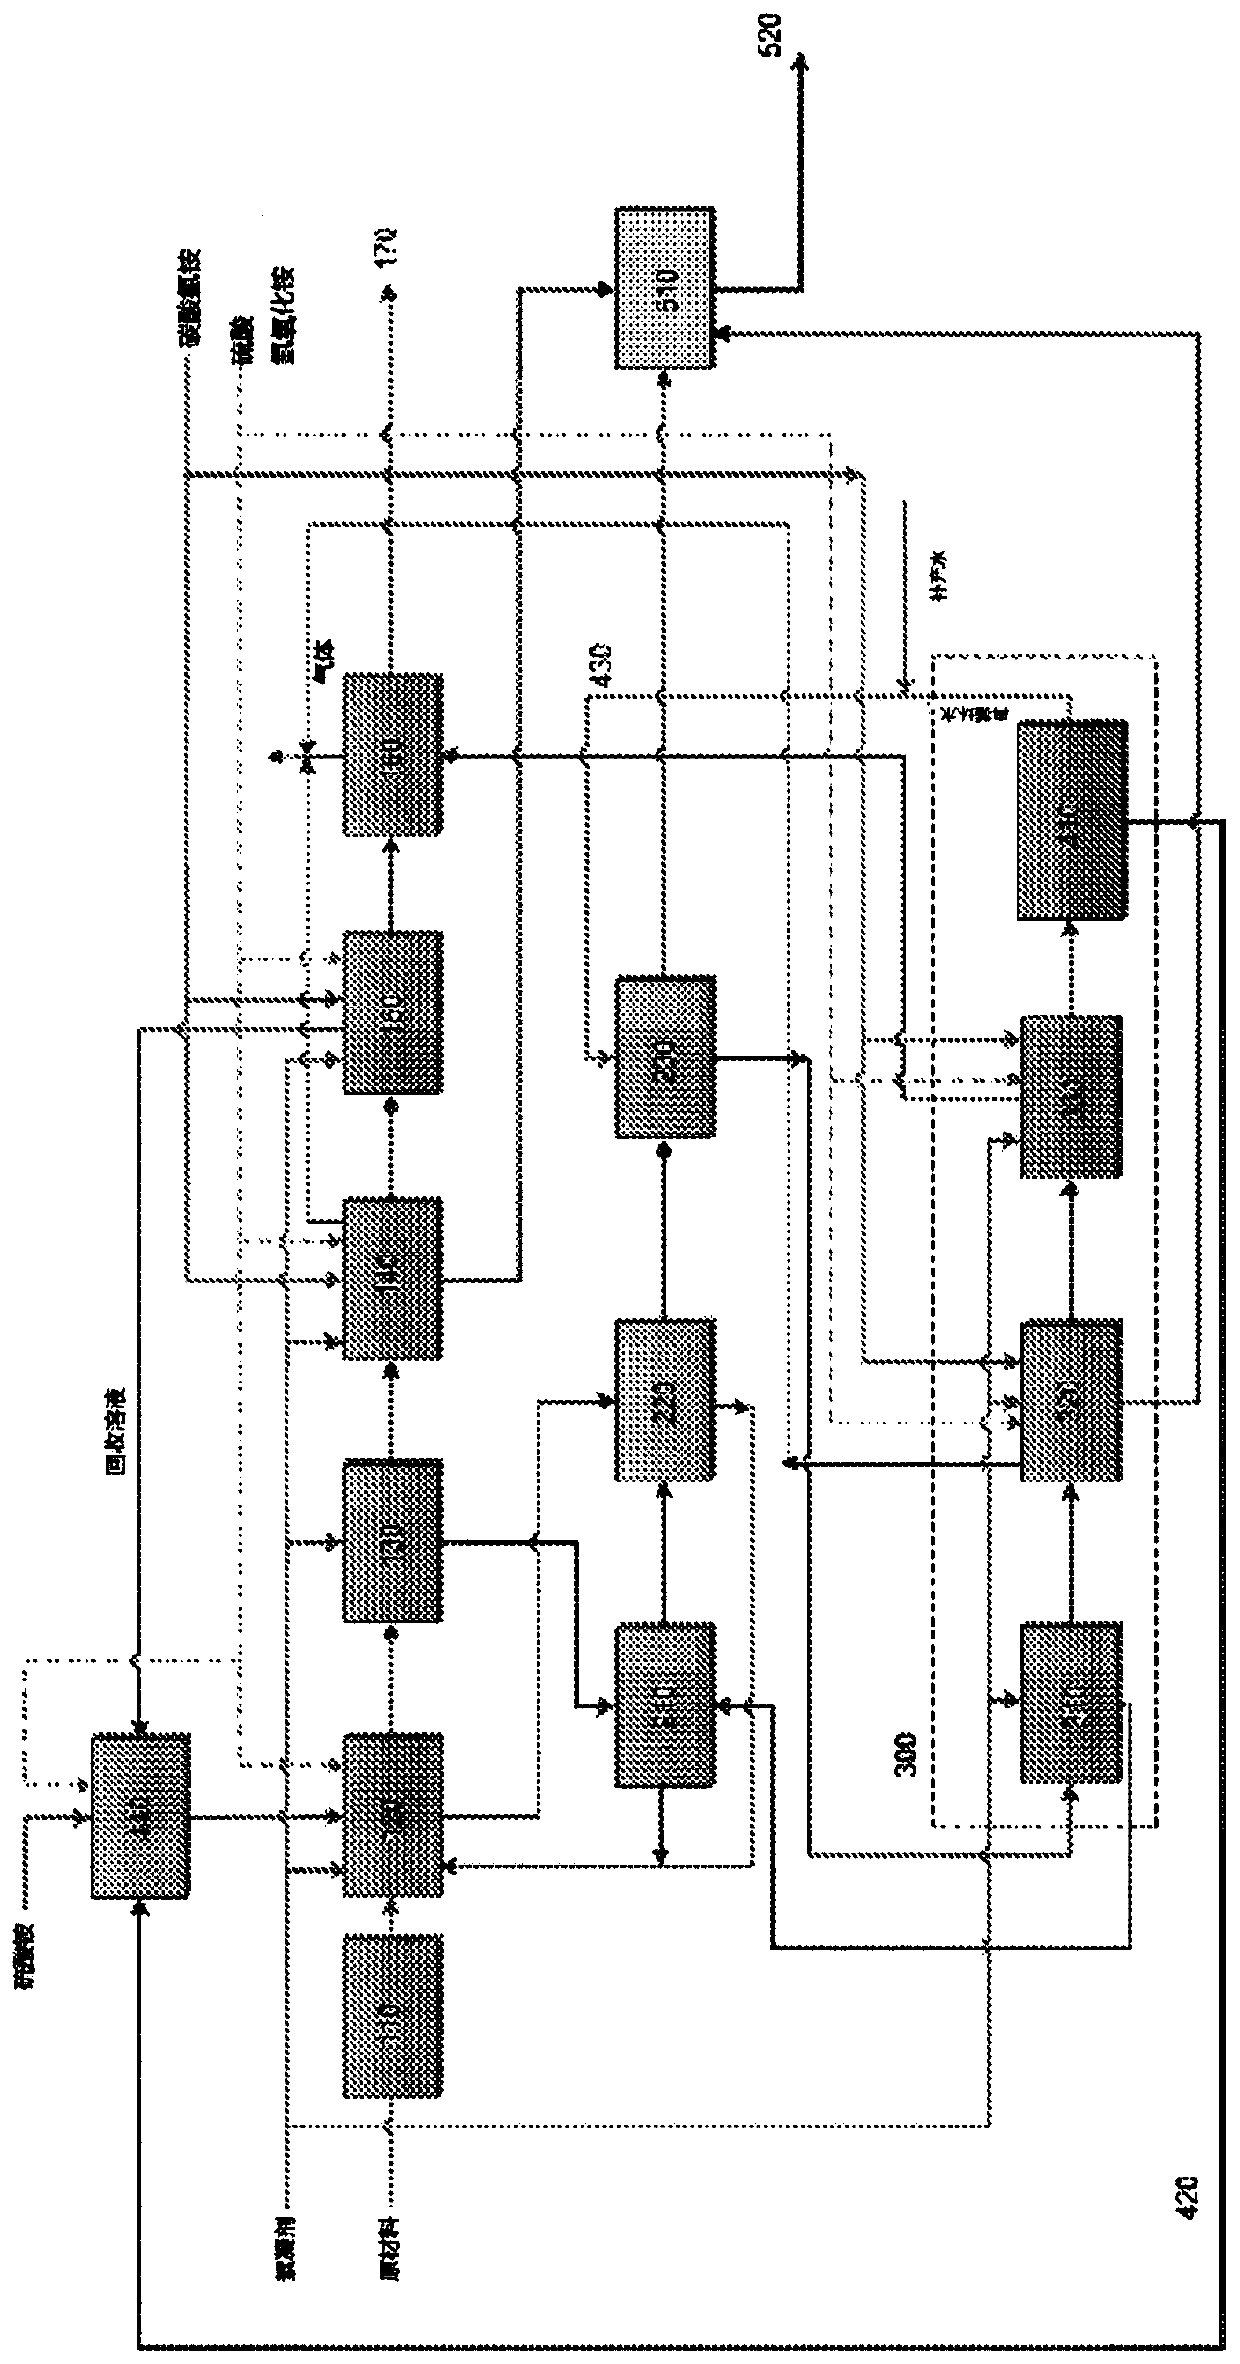 System and method for processing of minerals containing the lanthanide series and production of rare earth oxides